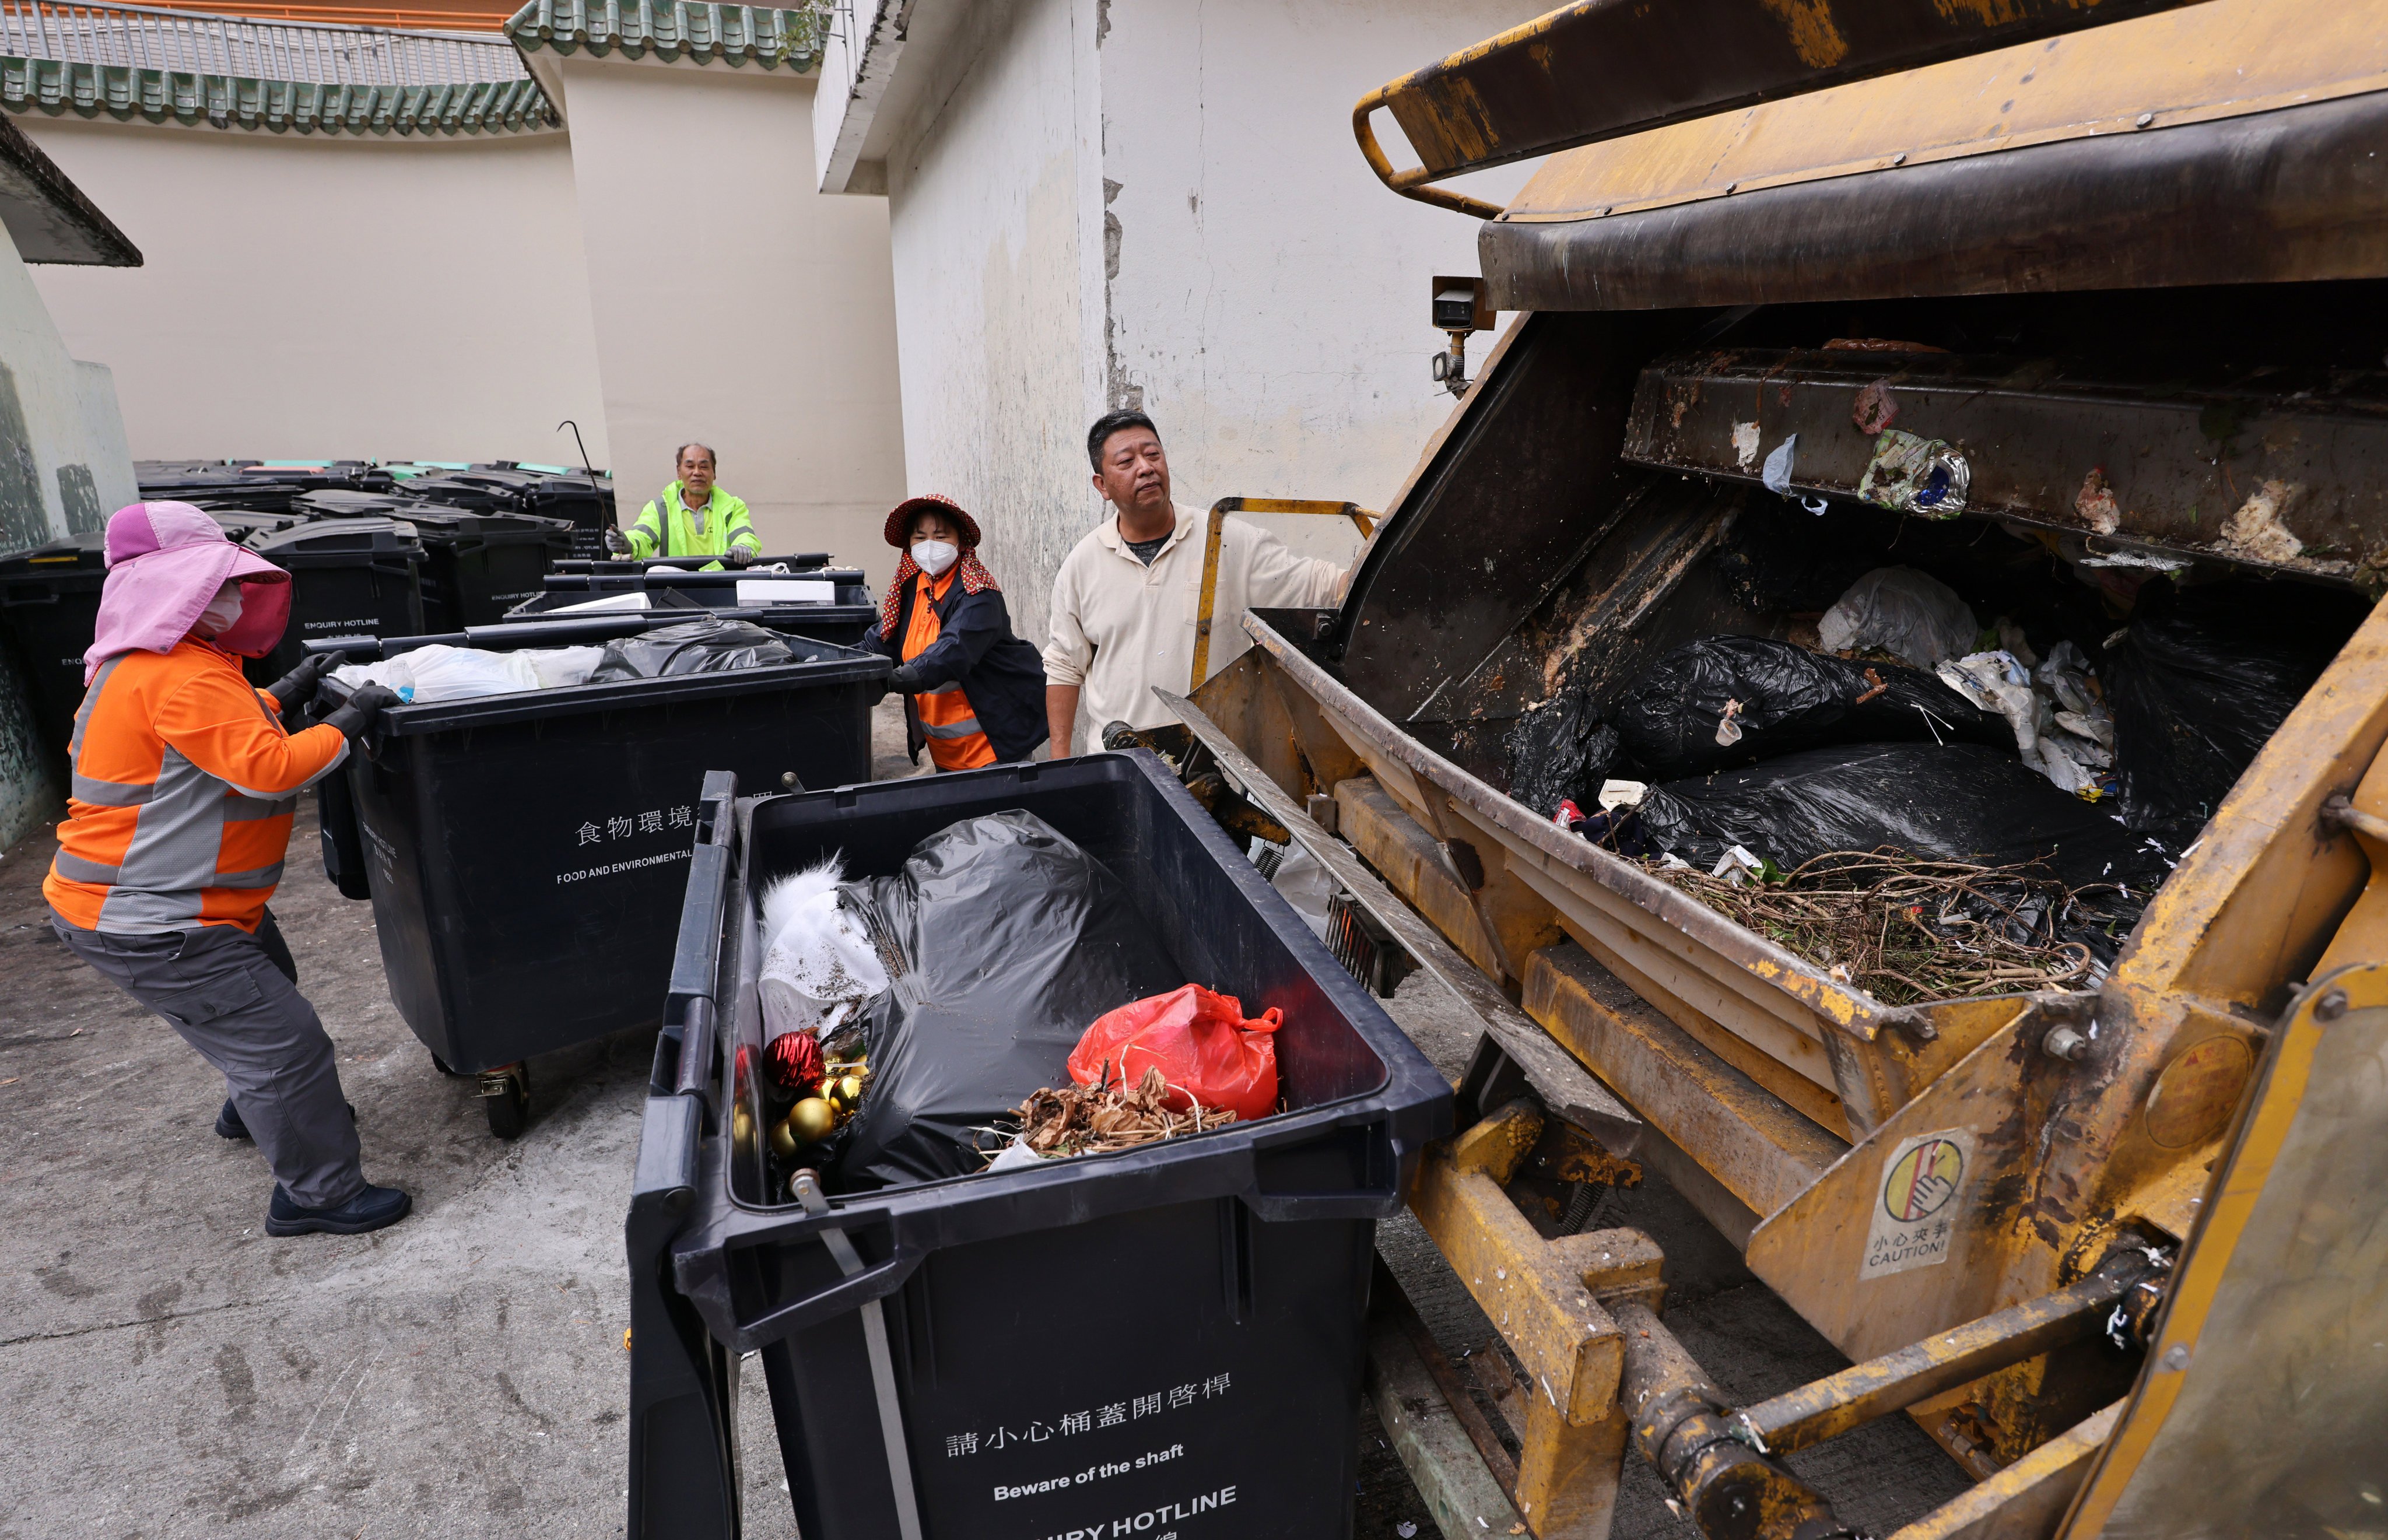 Workers handle rubbish in Tai Wai. City leader John Lee has told the environment minister to spread the word about the waste-charging scheme. Photo: May Tse